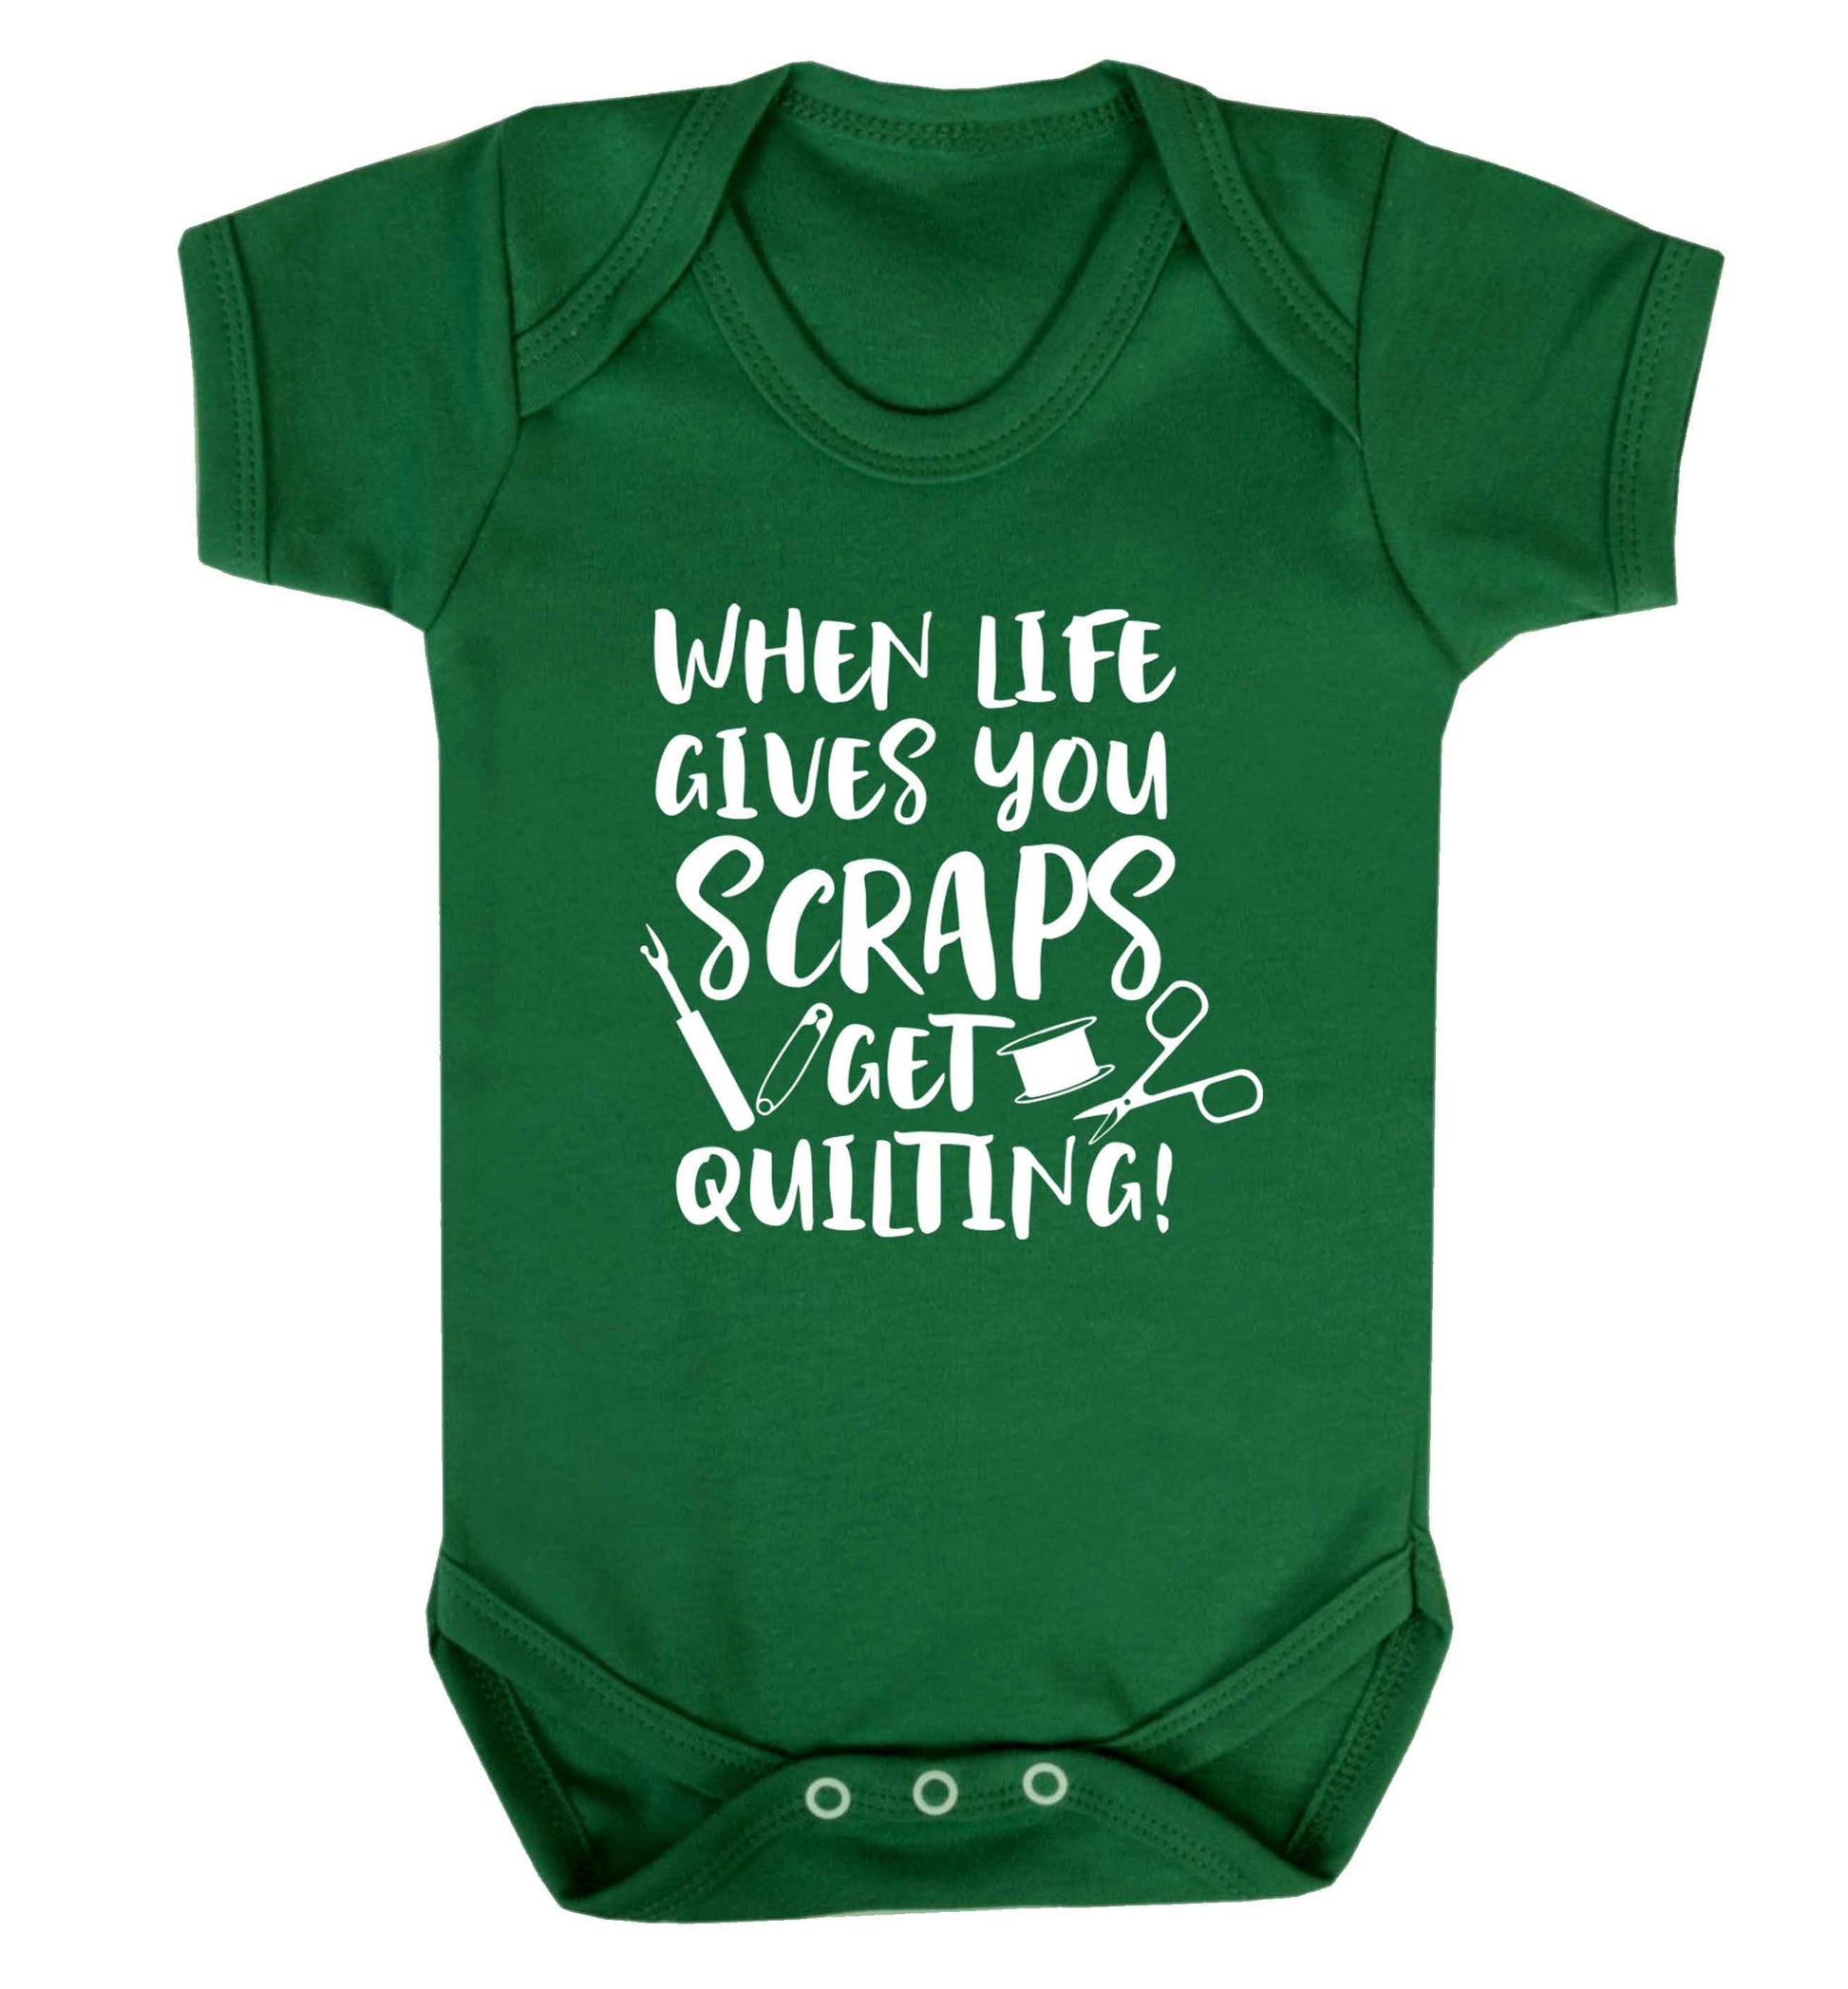 When life gives you scraps get quilting! Baby Vest green 18-24 months